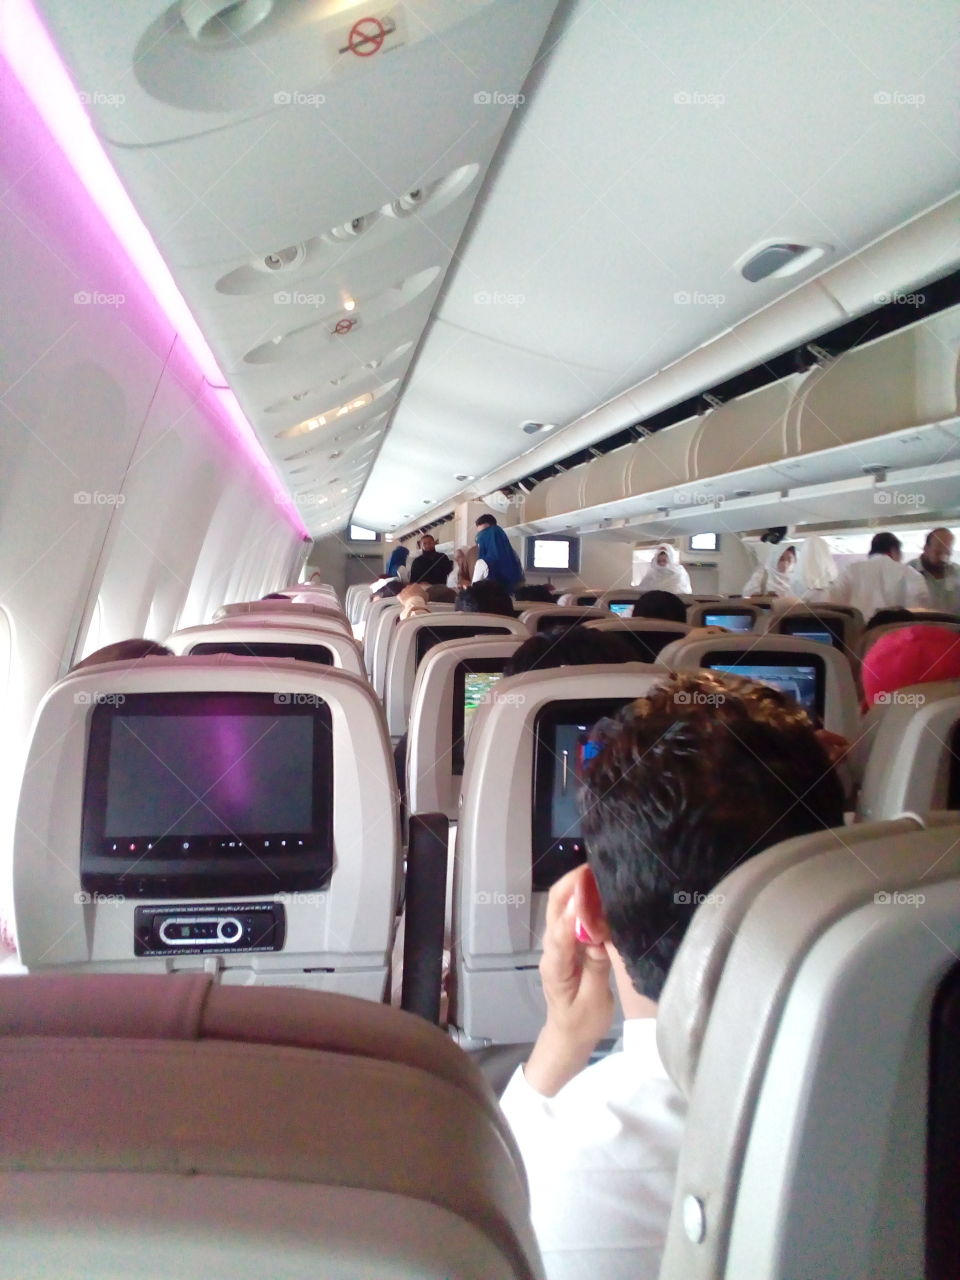 In airplane